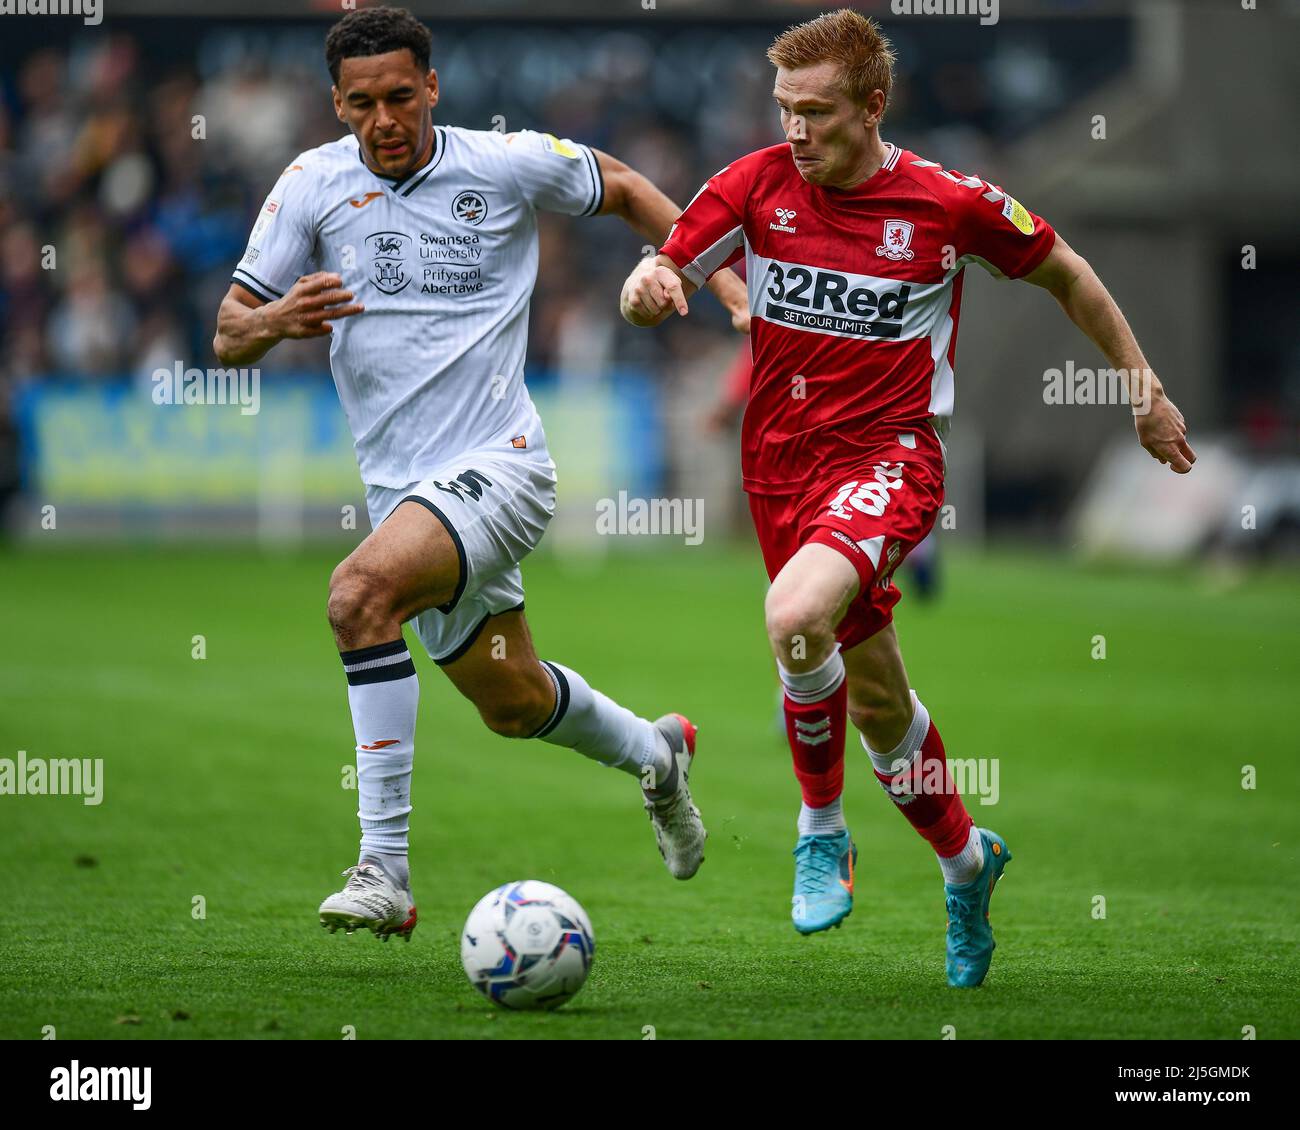 Duncan Watmore #18 of Middlesbrough in action during the game under pressure from Ben Cabango #5 of Swansea City Stock Photo